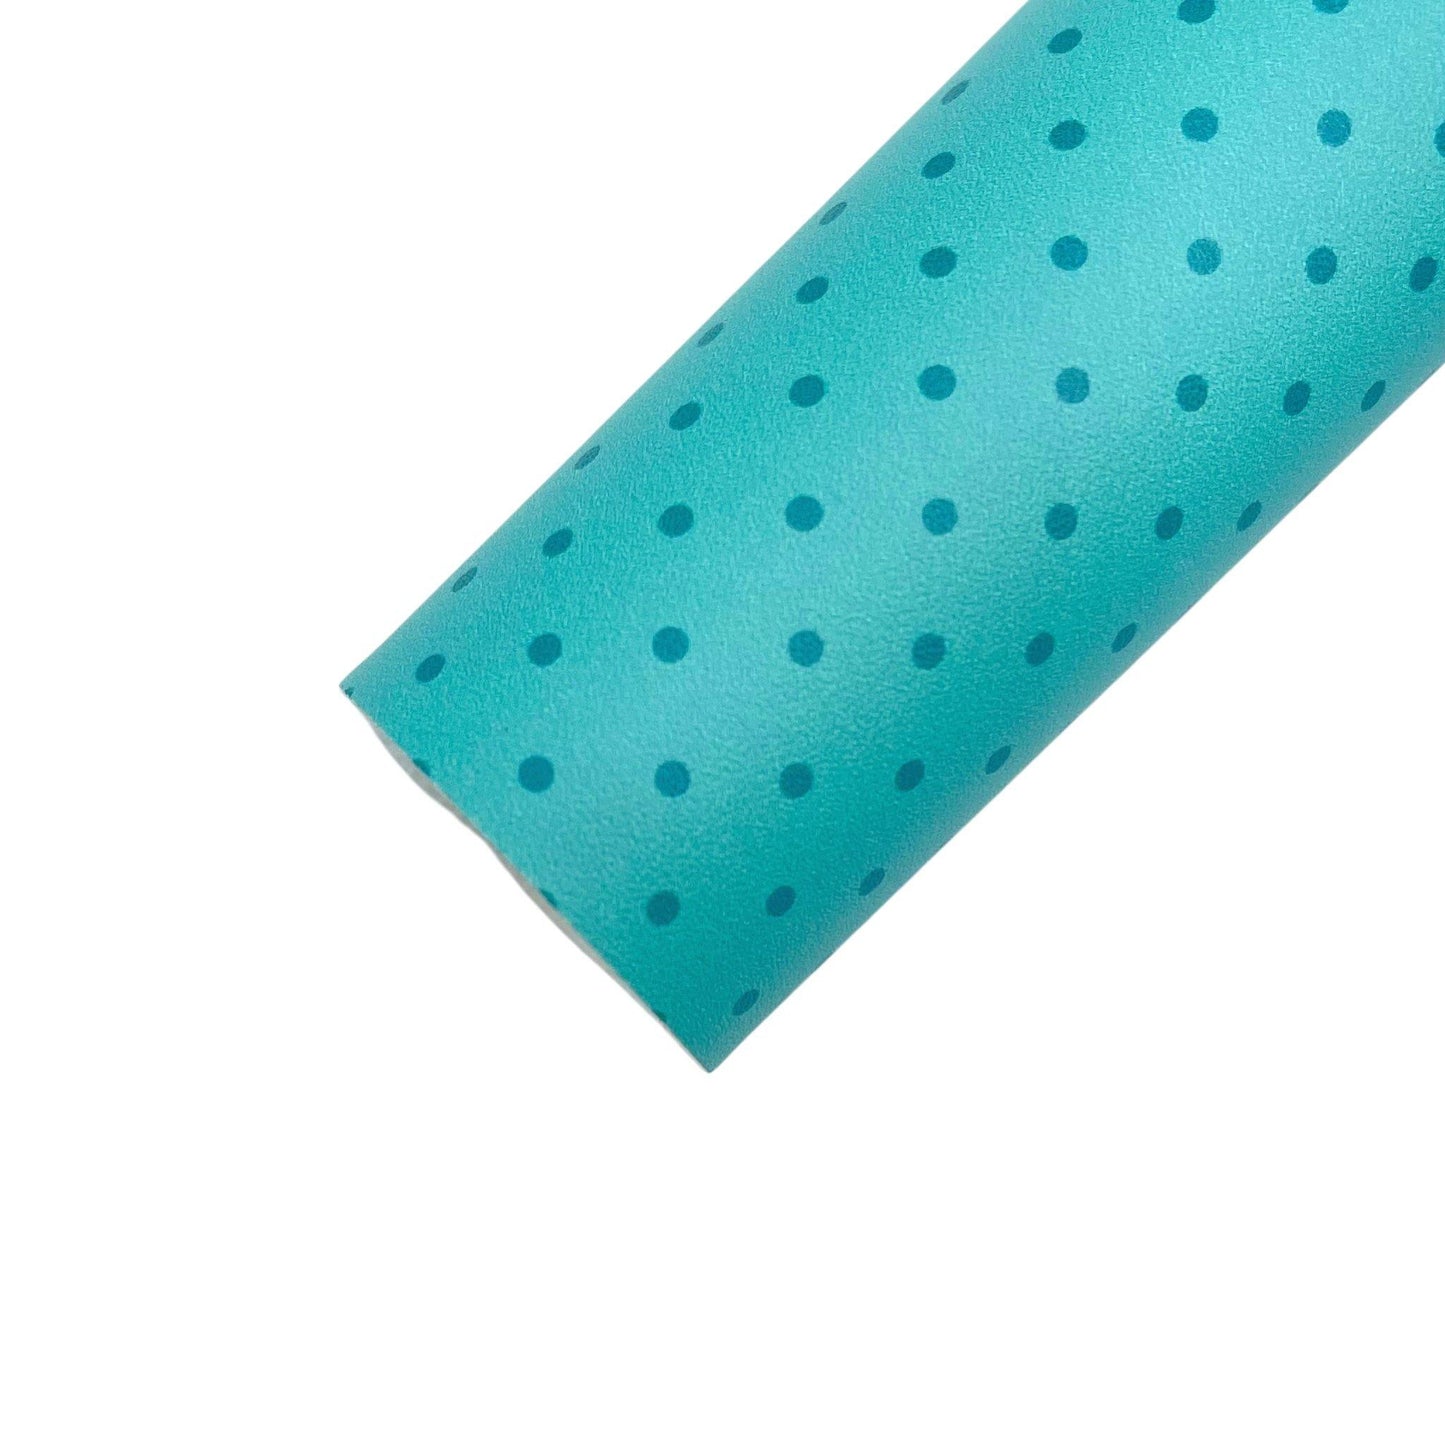 Spring Time Dots | Faux Leather Fabric Sheet - Pretty in Pink Supply